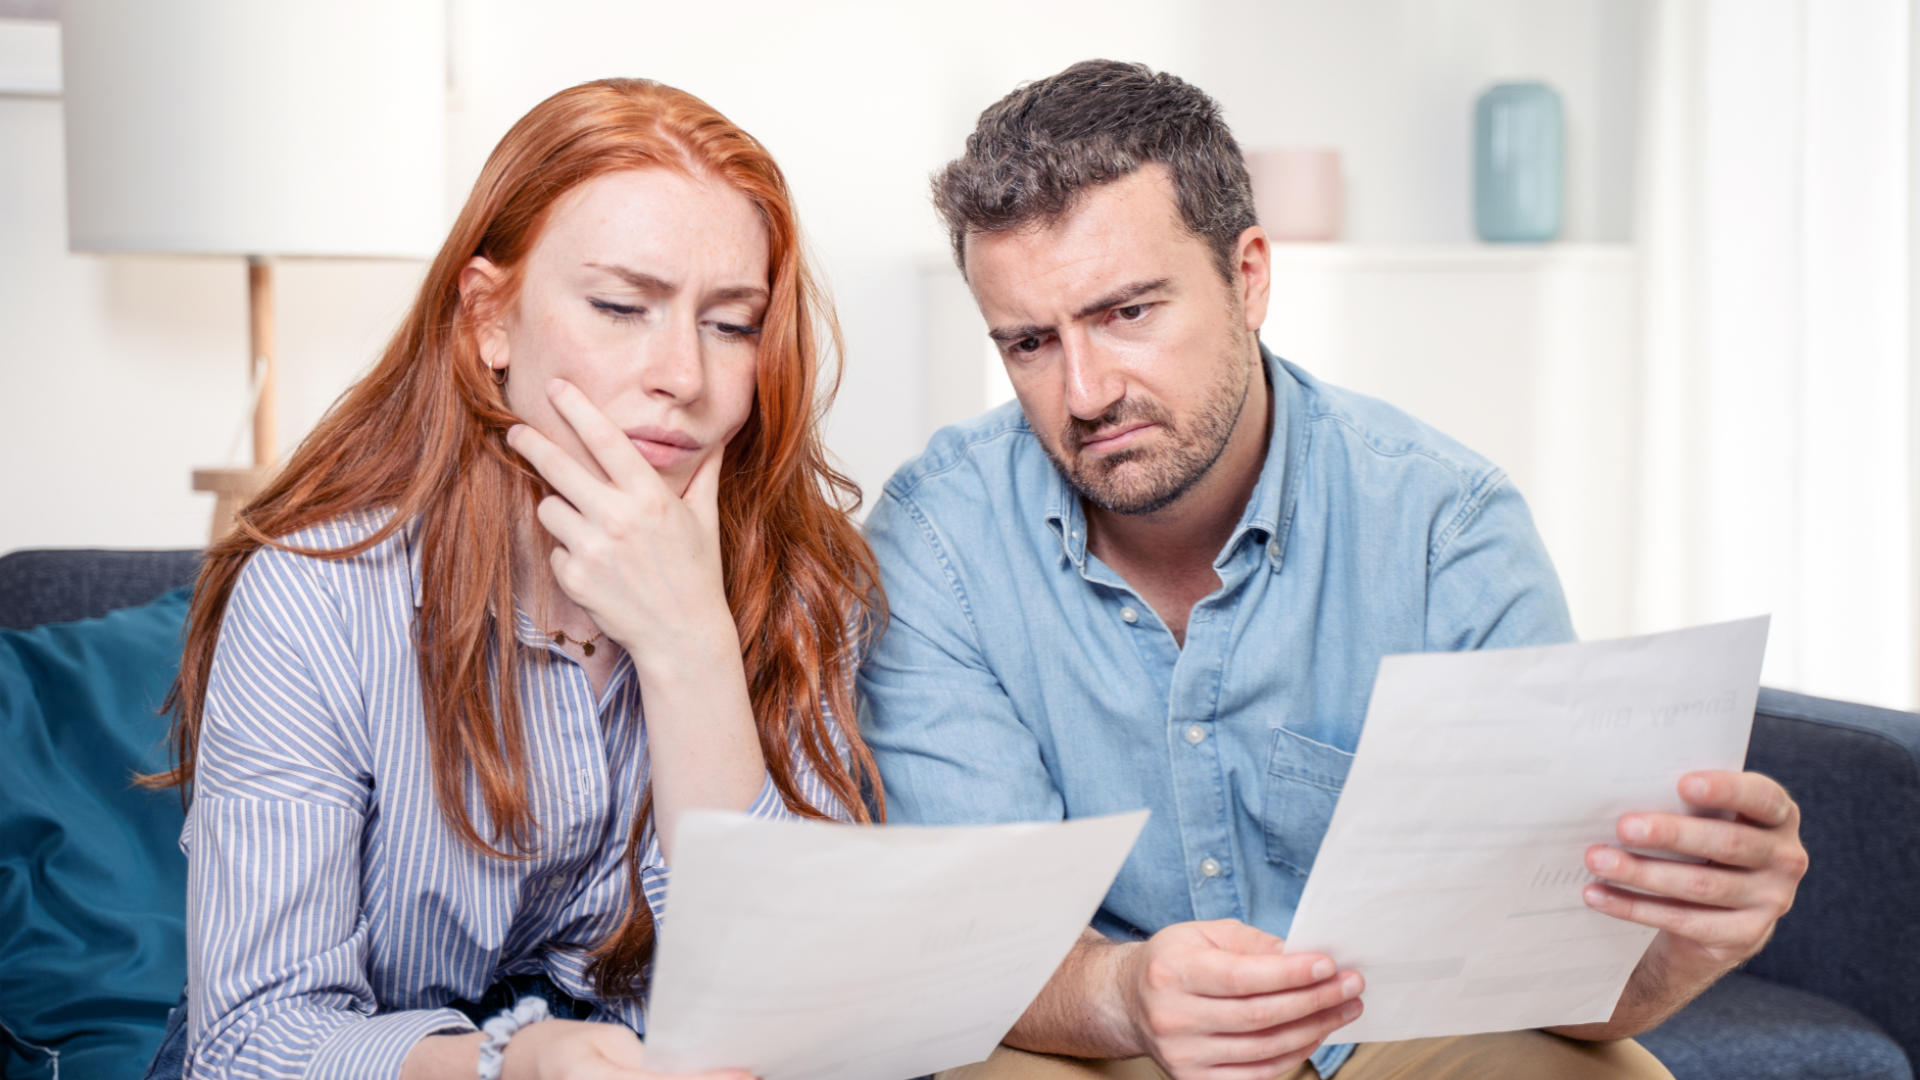 Worried about rising mortgages